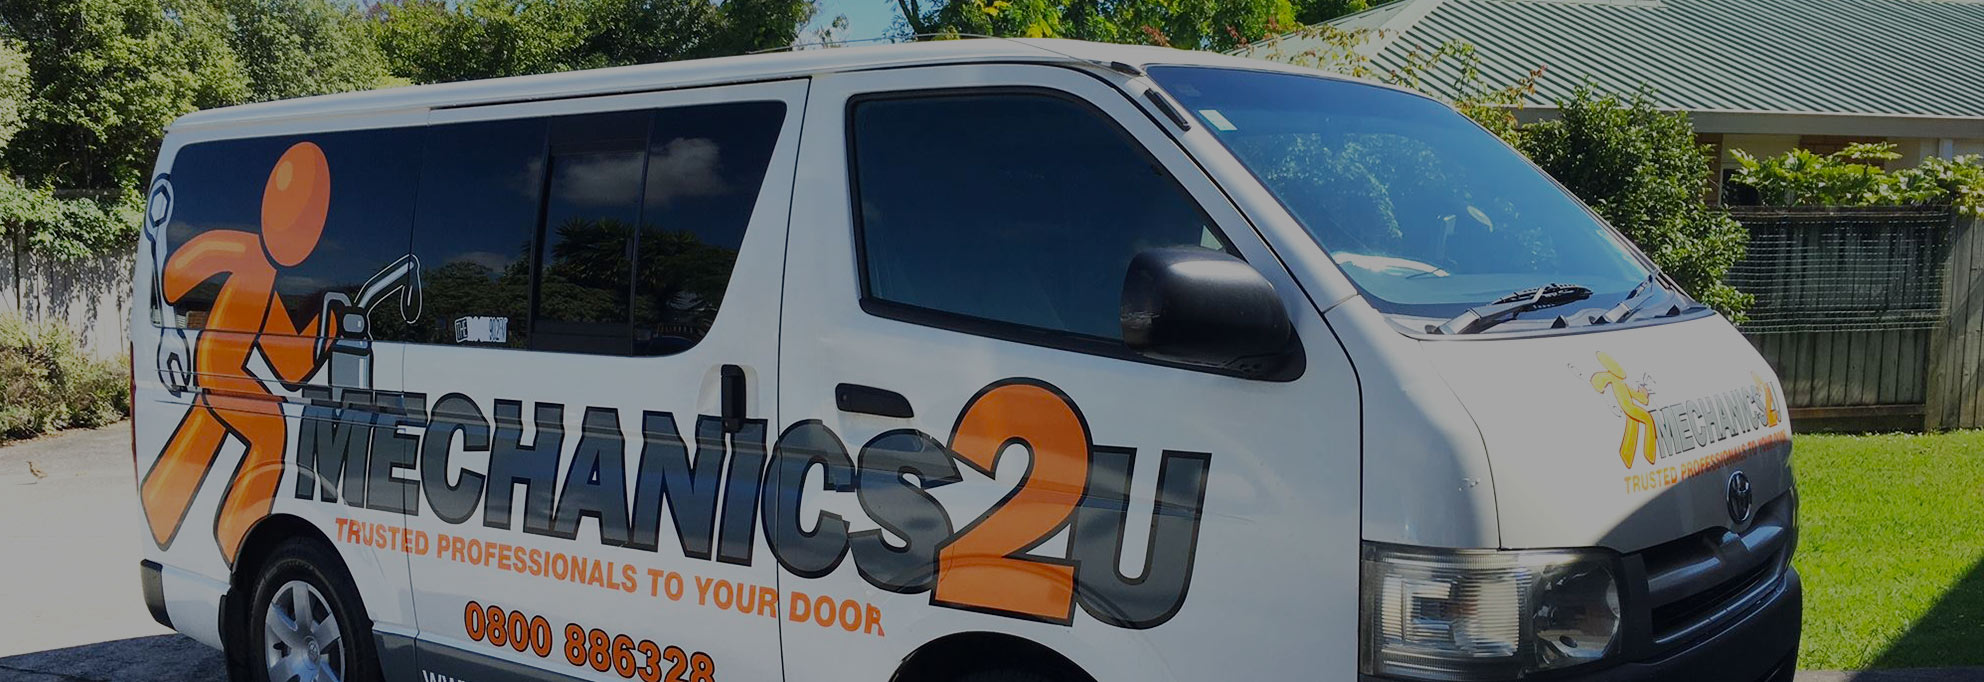   Trusted Professionals to your door   Servicing the greater Auckland region  